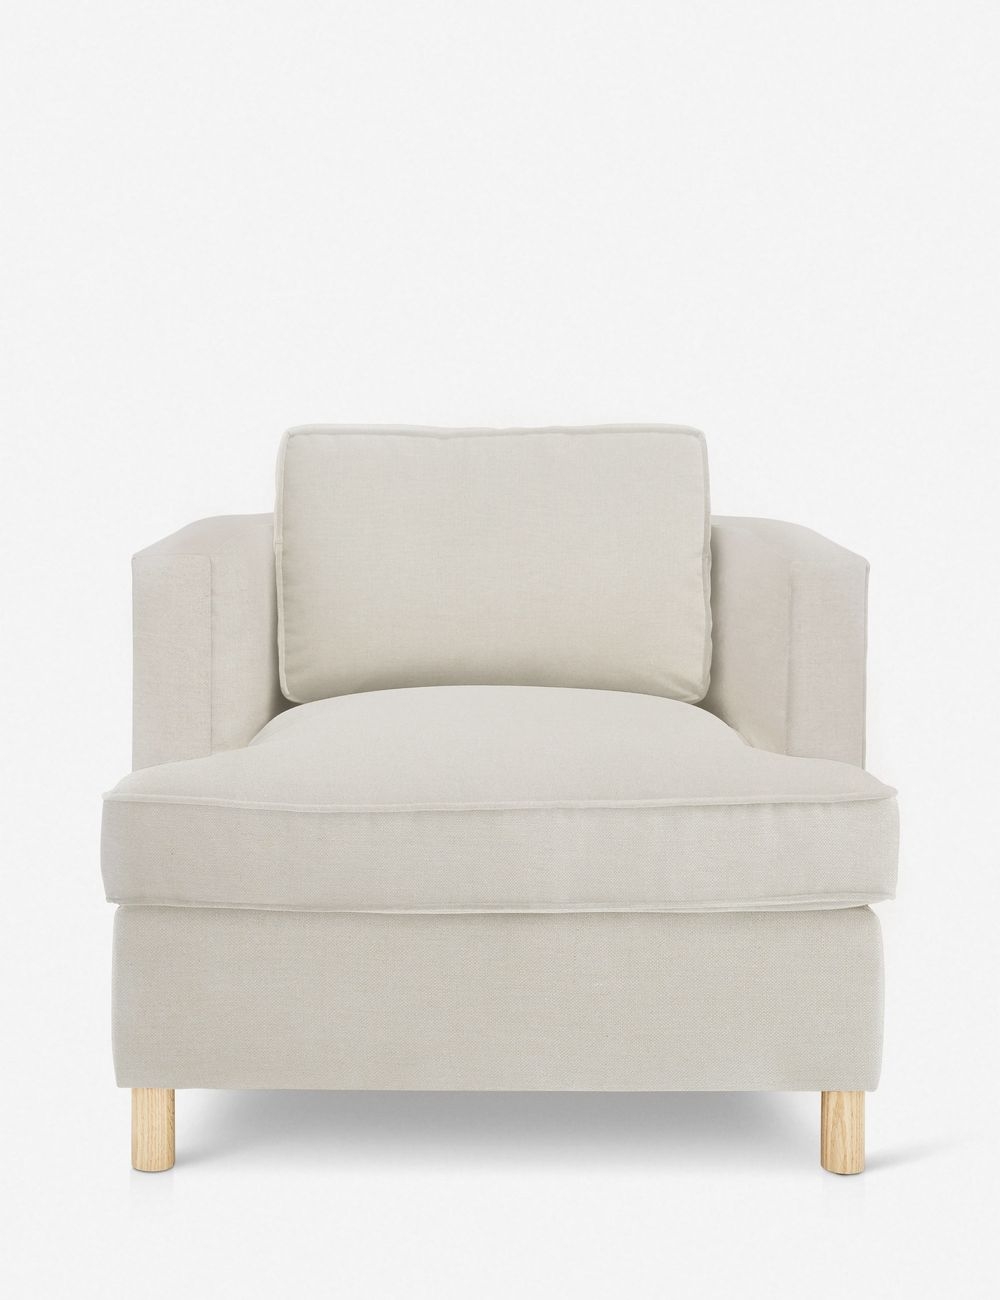 Belmont Accent Chair by Ginny Macdonald - Image 0